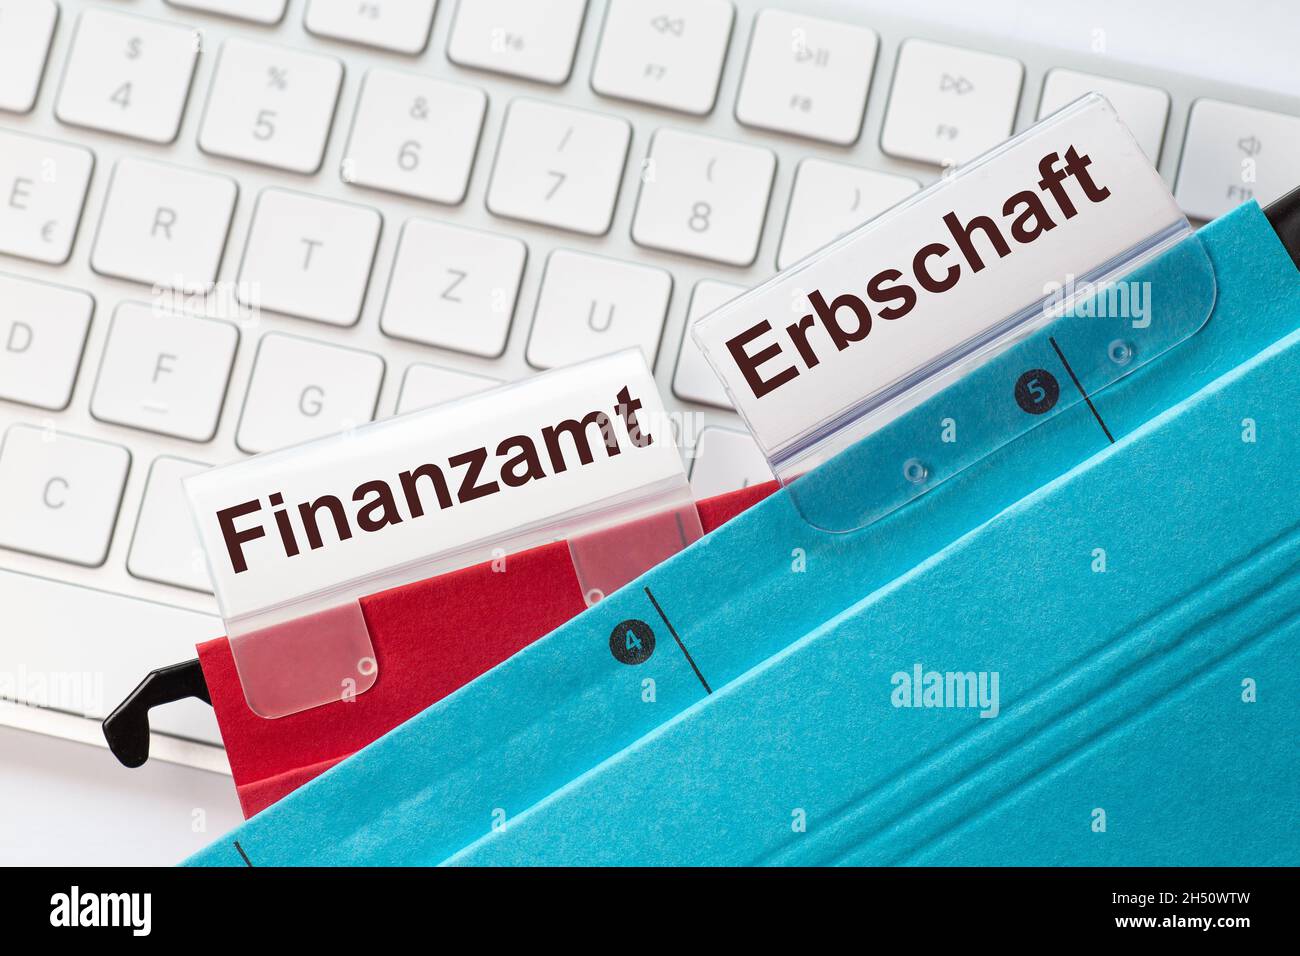 The German words tax office and inheritance can be seen on the labels of a red and blue hanging folders. The hanging folders are on a computer keyboar Stock Photo